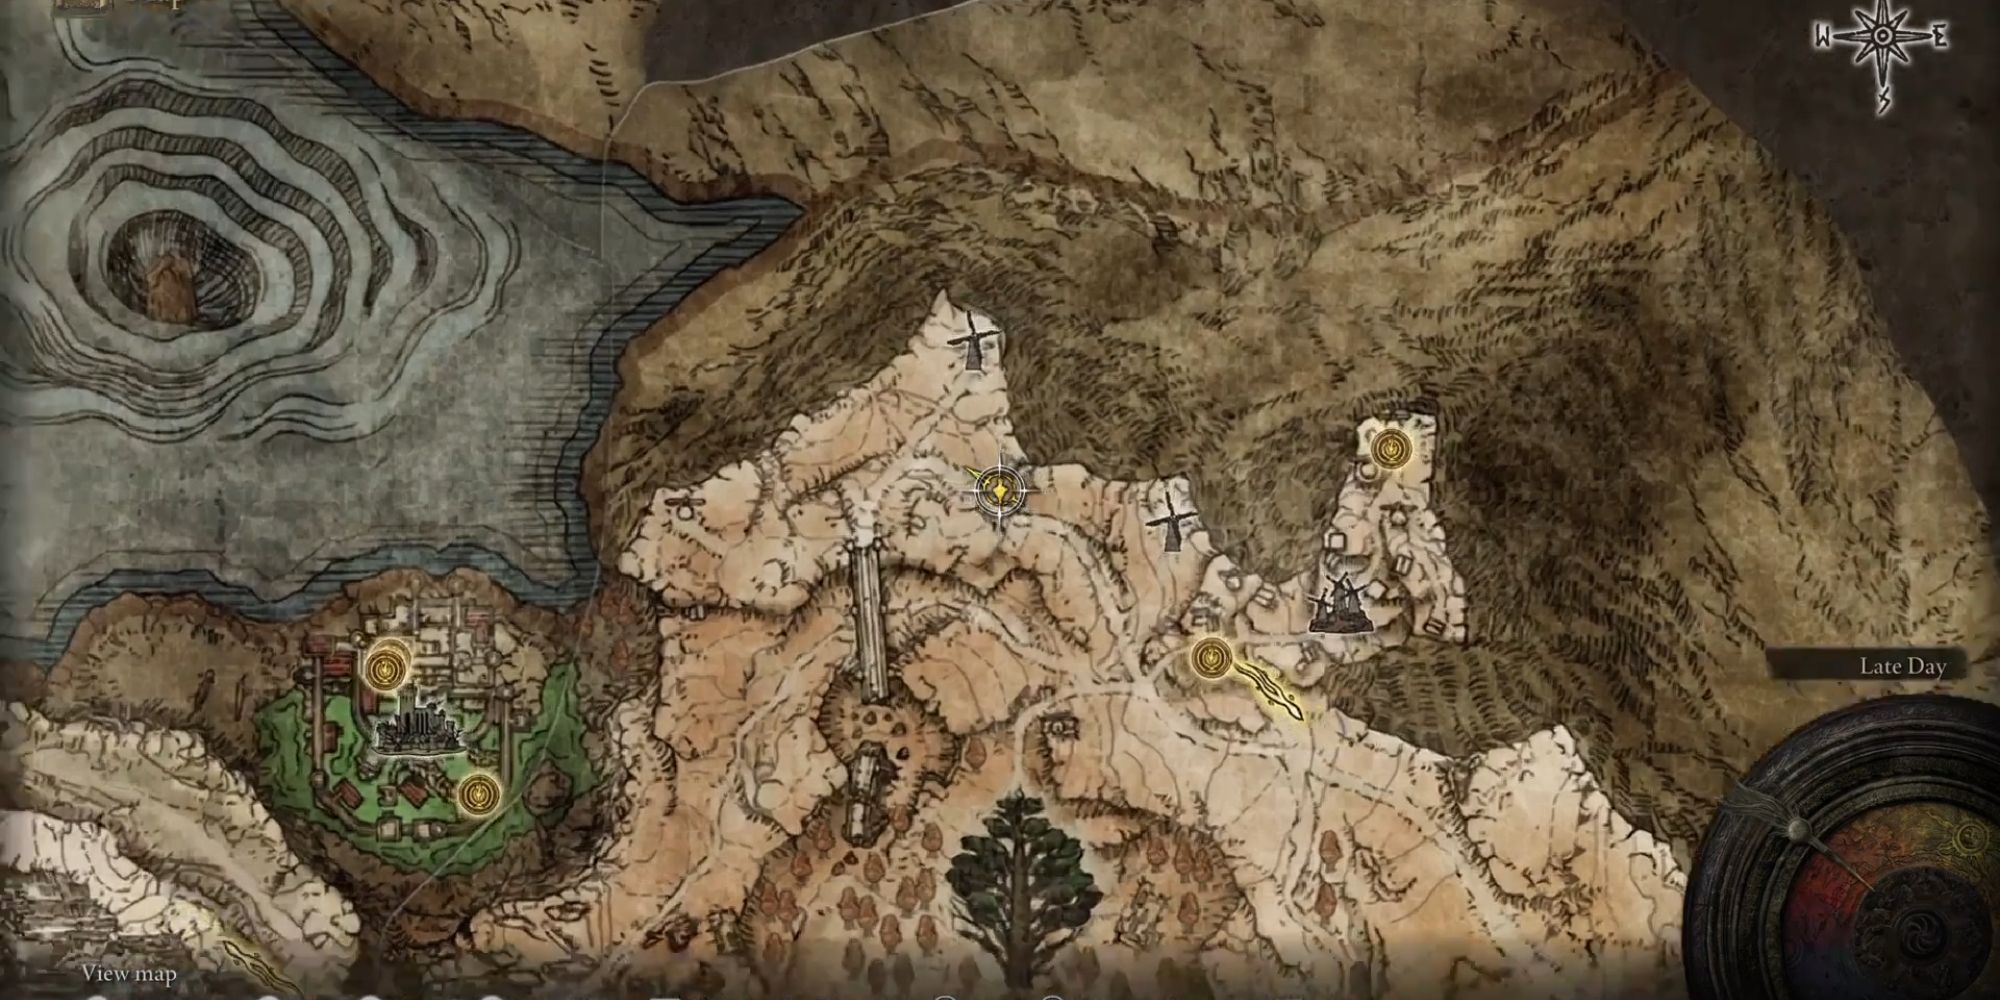 Battle mage location on the elden ring map